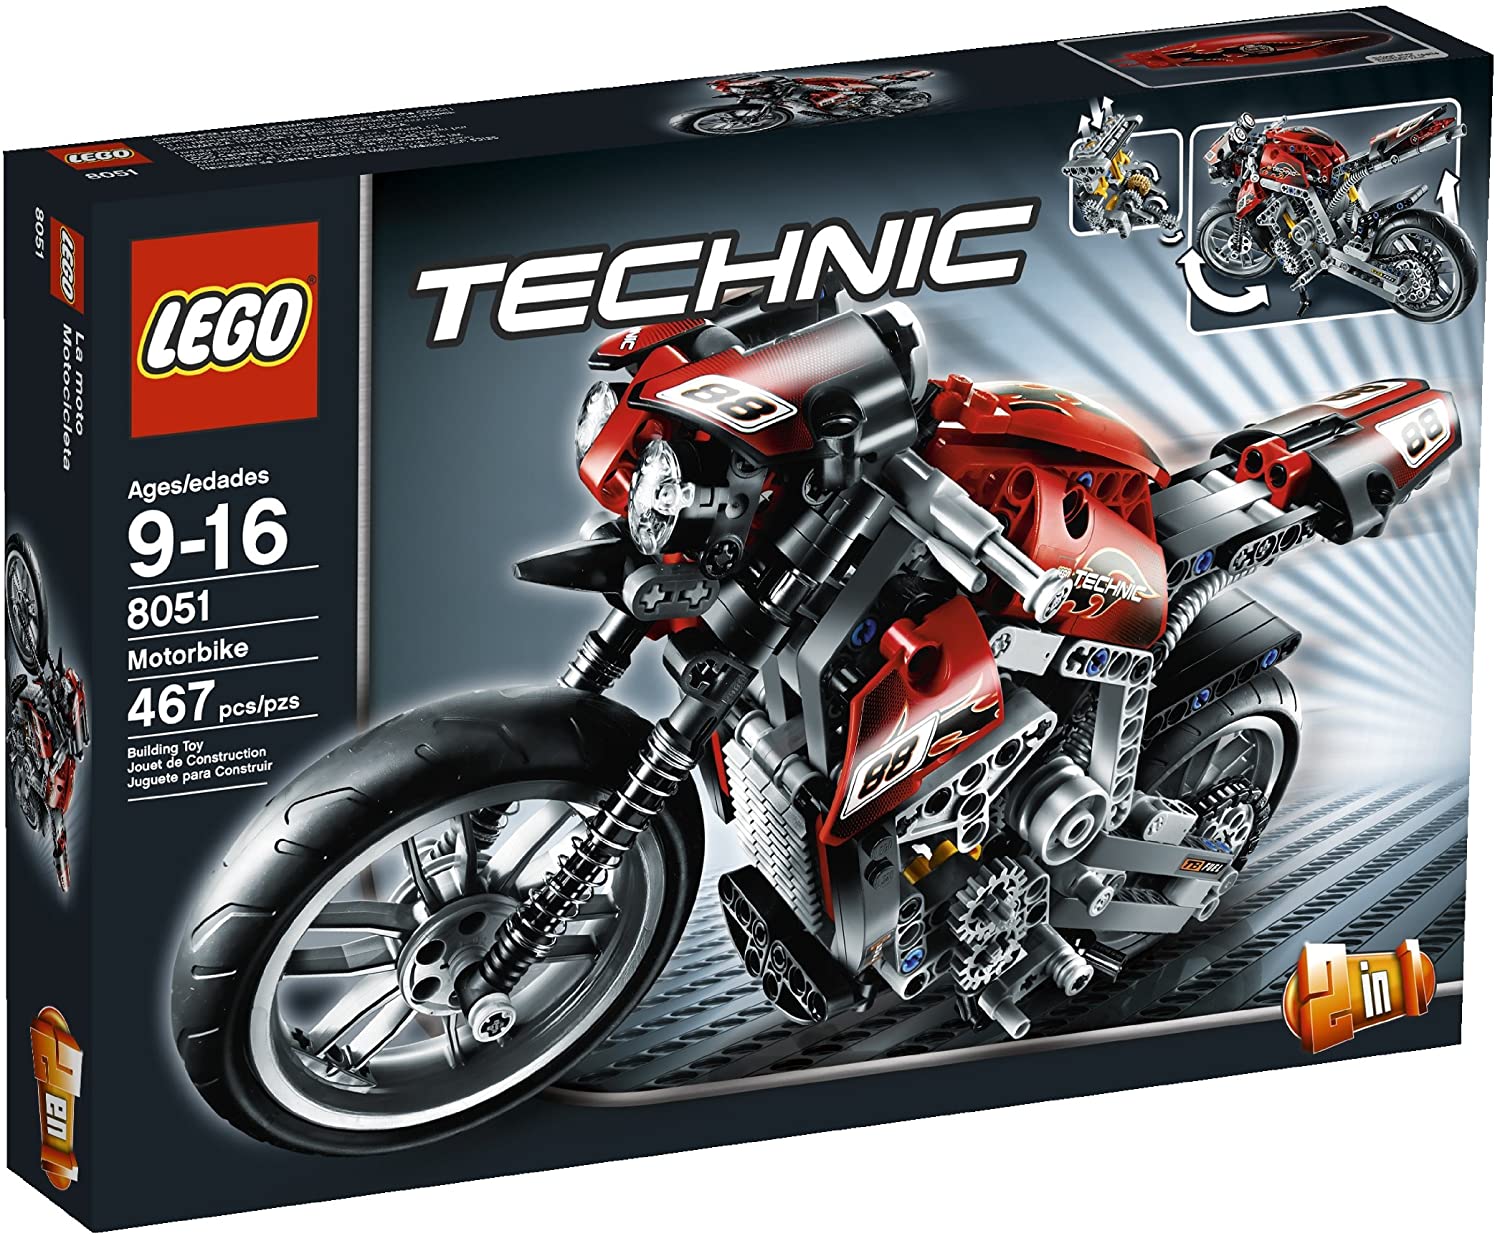 7 Best LEGO Motorcycle Sets 2022 - Buying Guide & Reviews 2